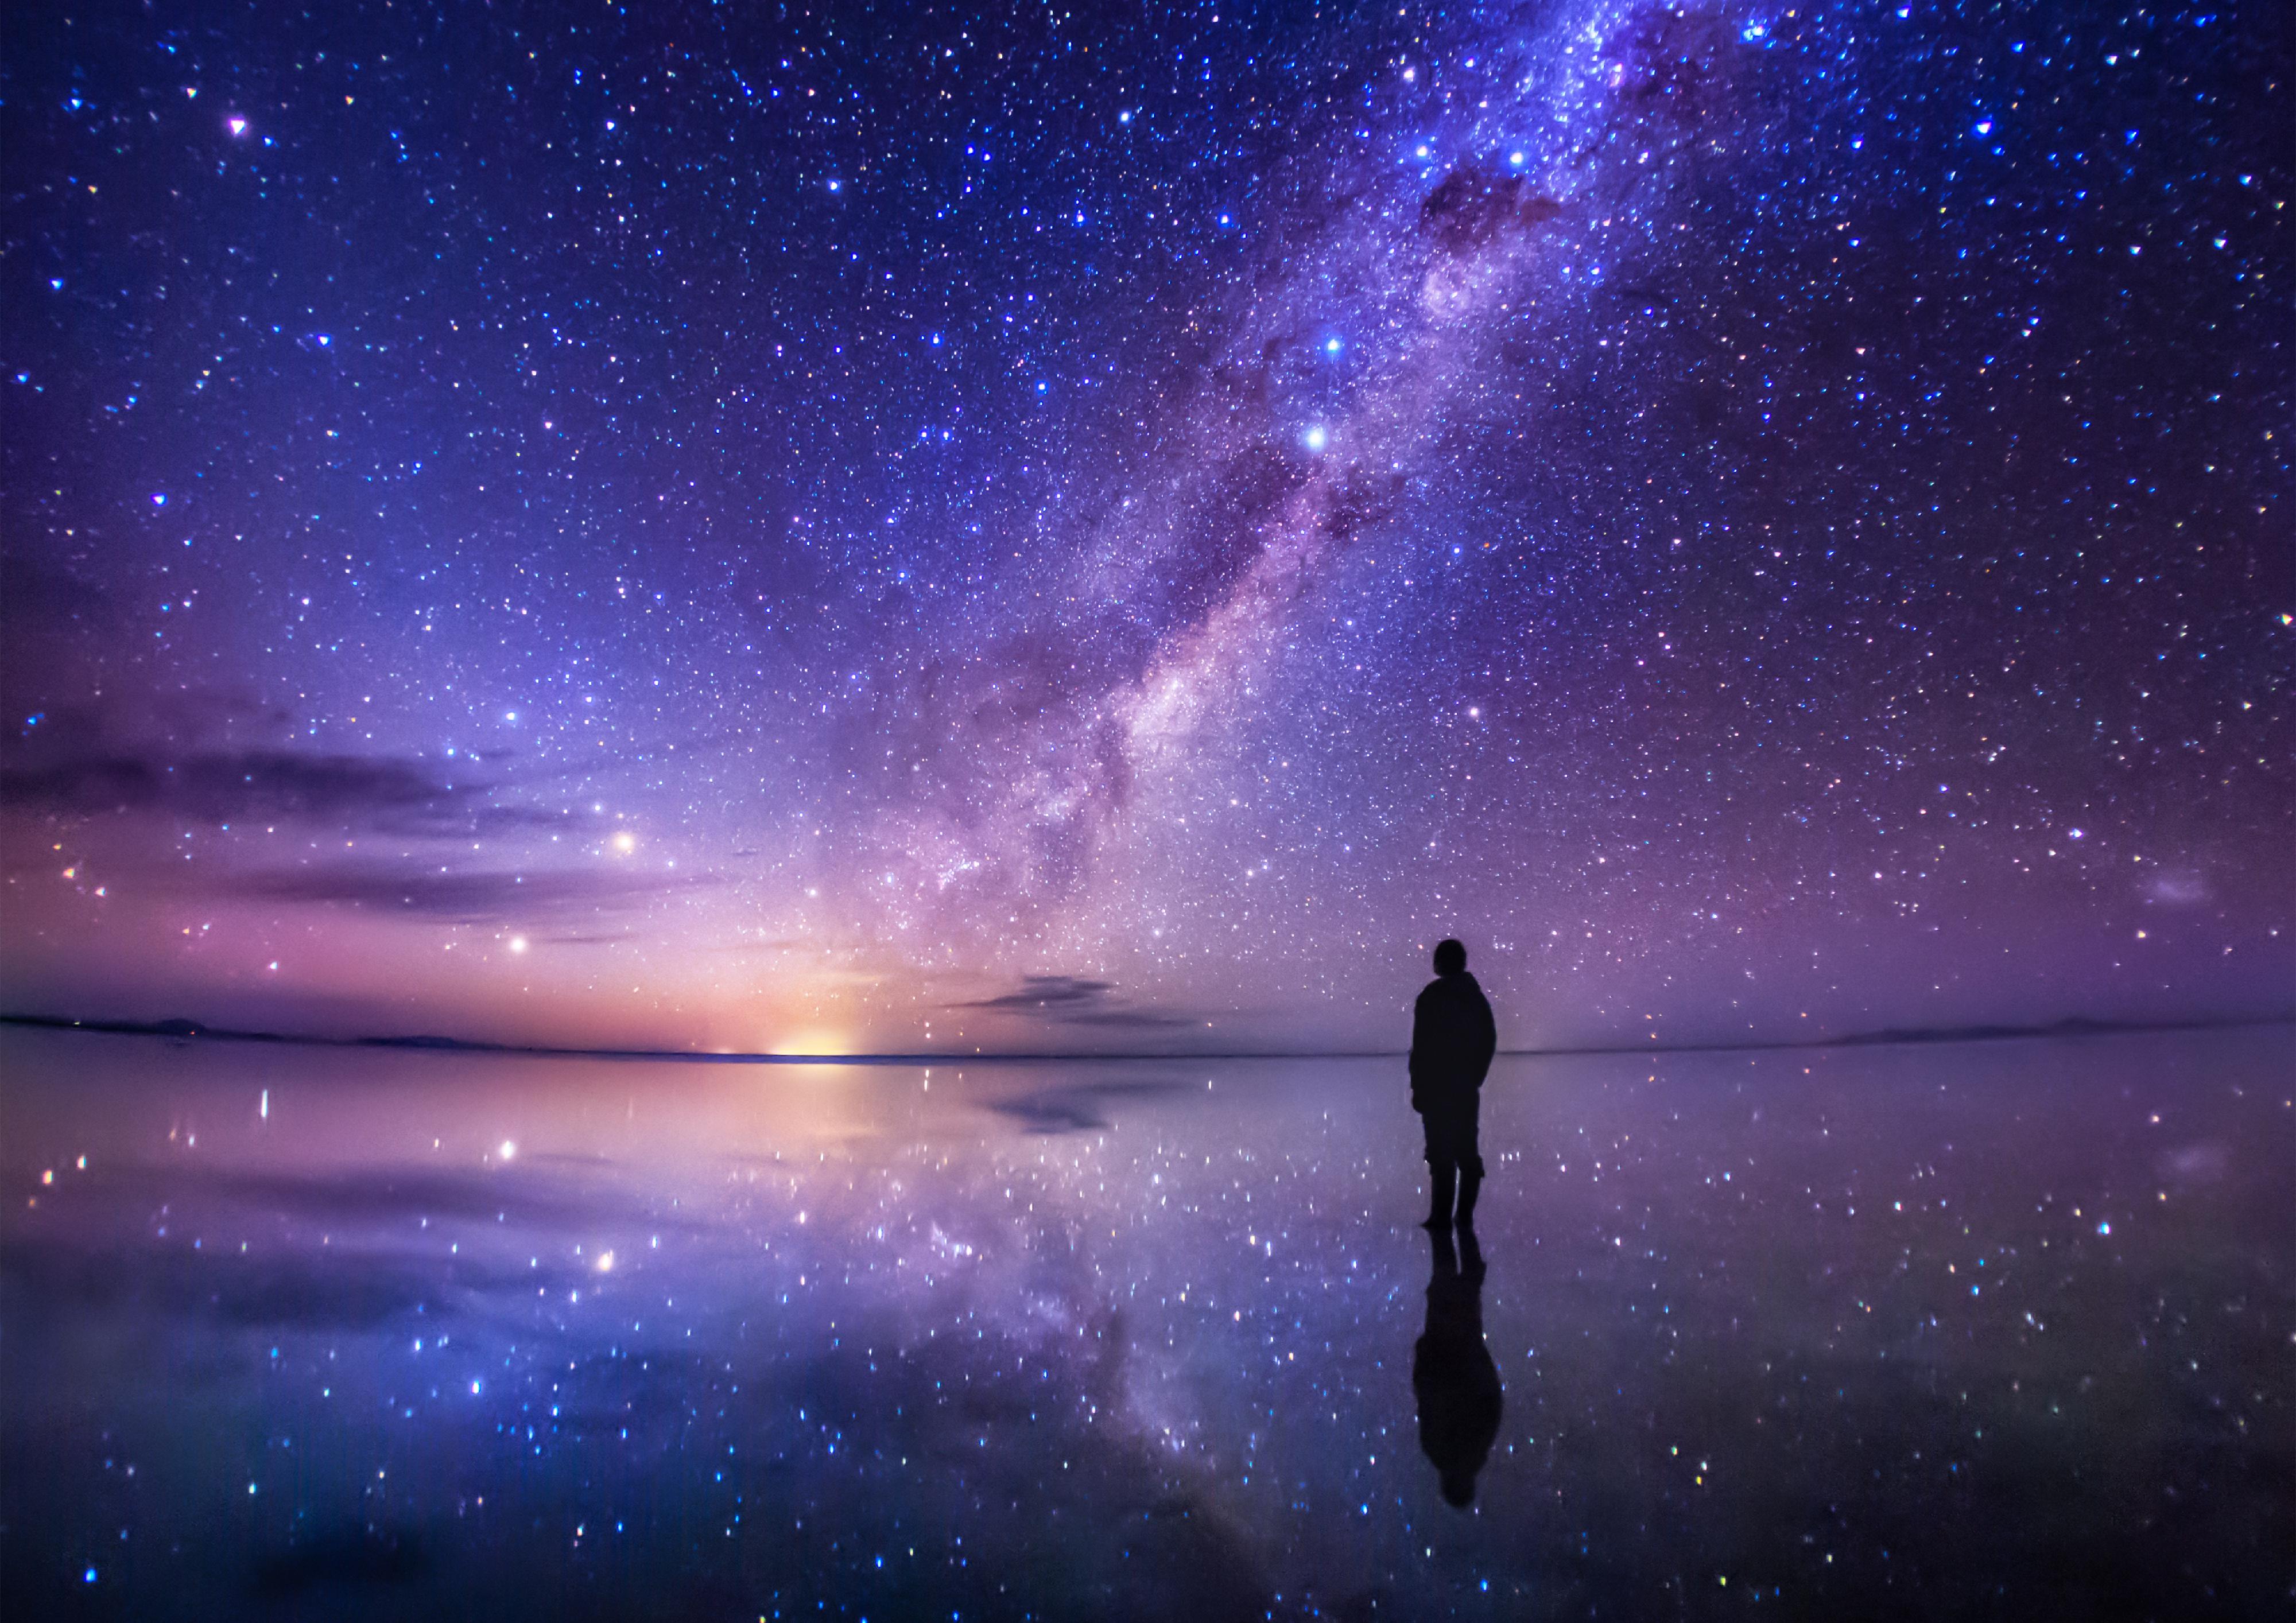 The Hong Kong Space Museum will launch a new sky show, "Sky Tour: Window on the Universe", at its Space Theatre tomorrow (October 21). Picture shows Salar de Uyuni in Bolivia, the largest salt flat in the world and best known as the "Mirror of the Sky". It is covered by a thick but extraordinarily flat layer of salt. After rainfall, the thin layer of water will transform the area into the world's largest mirror. At night, visitors will find themselves in a magical wonderland completely surrounded by stars from above and below.